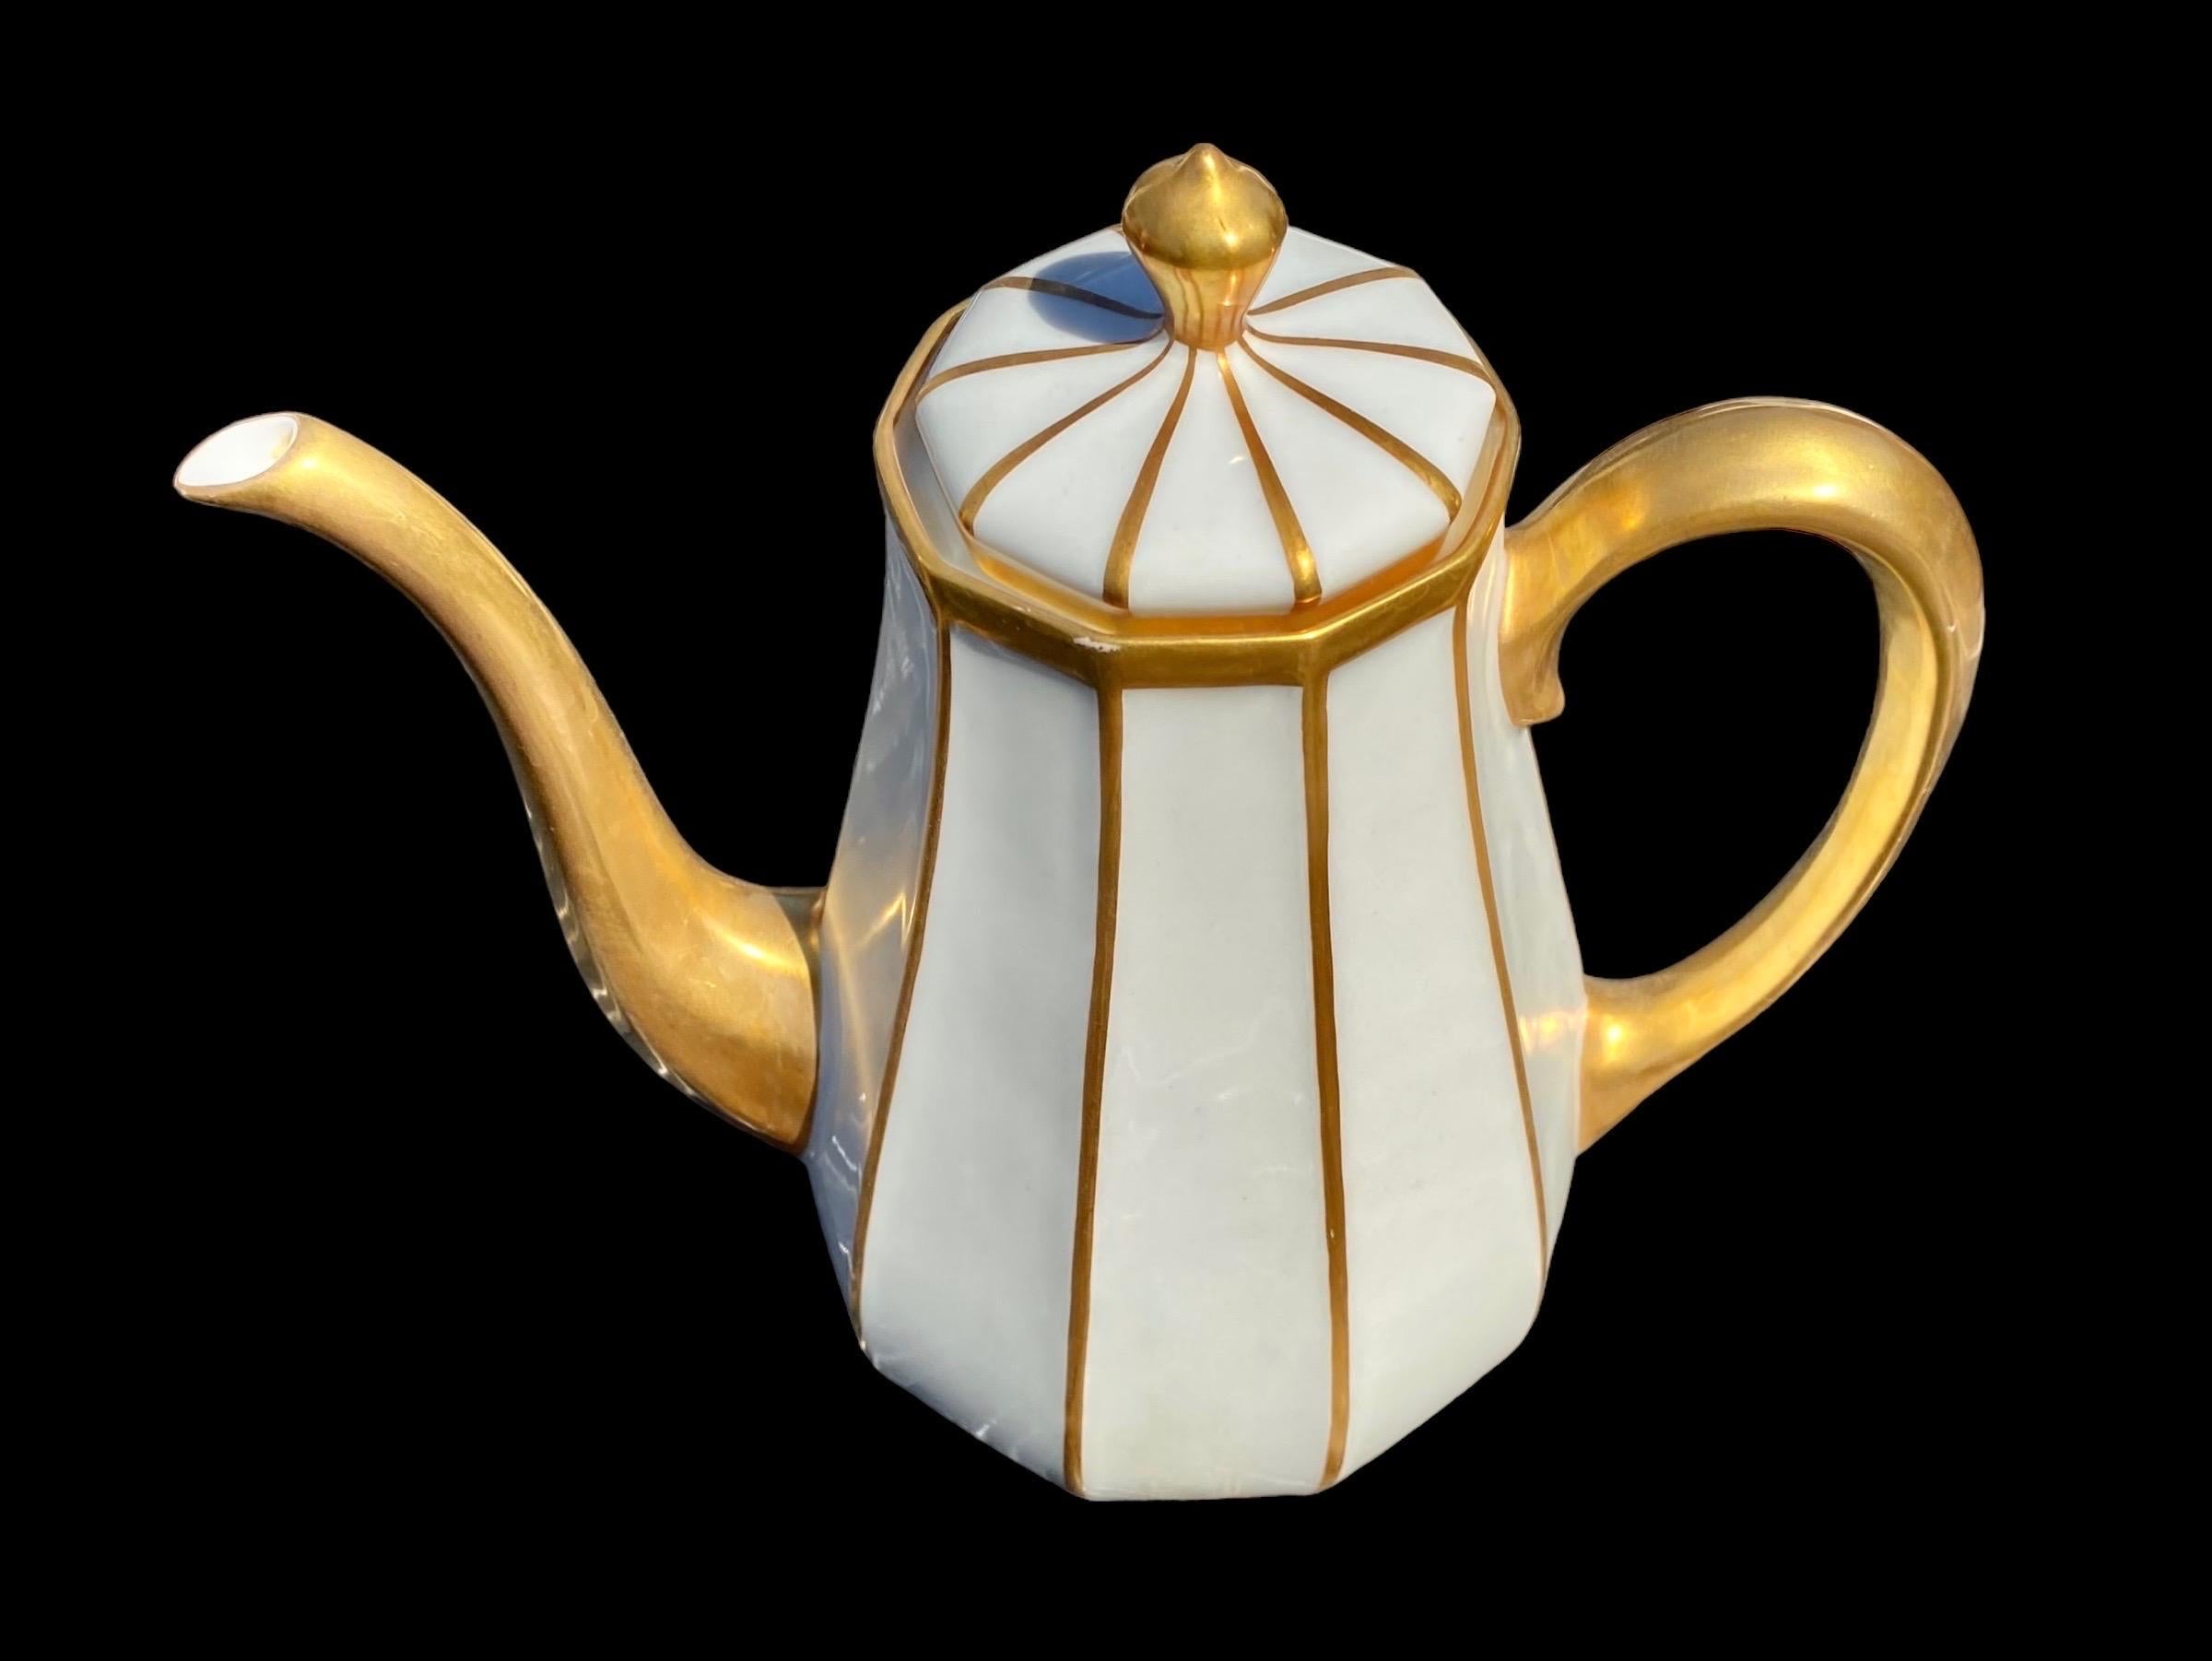 A lovely early 20th century French Limoges coffee pot having 14 karat hand applied gold striped accents, handle, and spout, on a pure white background, in flawless condition.
A piece of history, to behold and cherish today, and for future